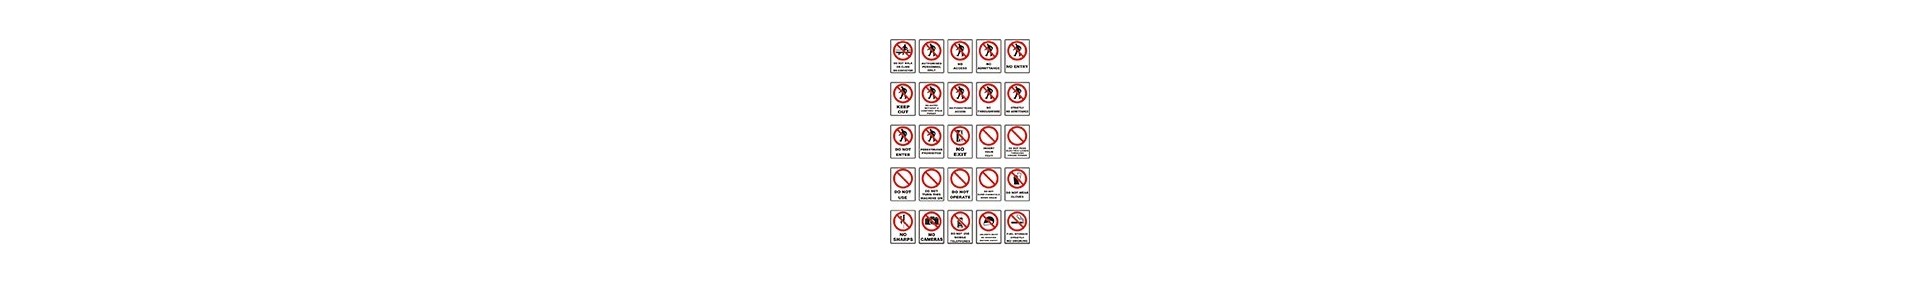 Prohibition signs